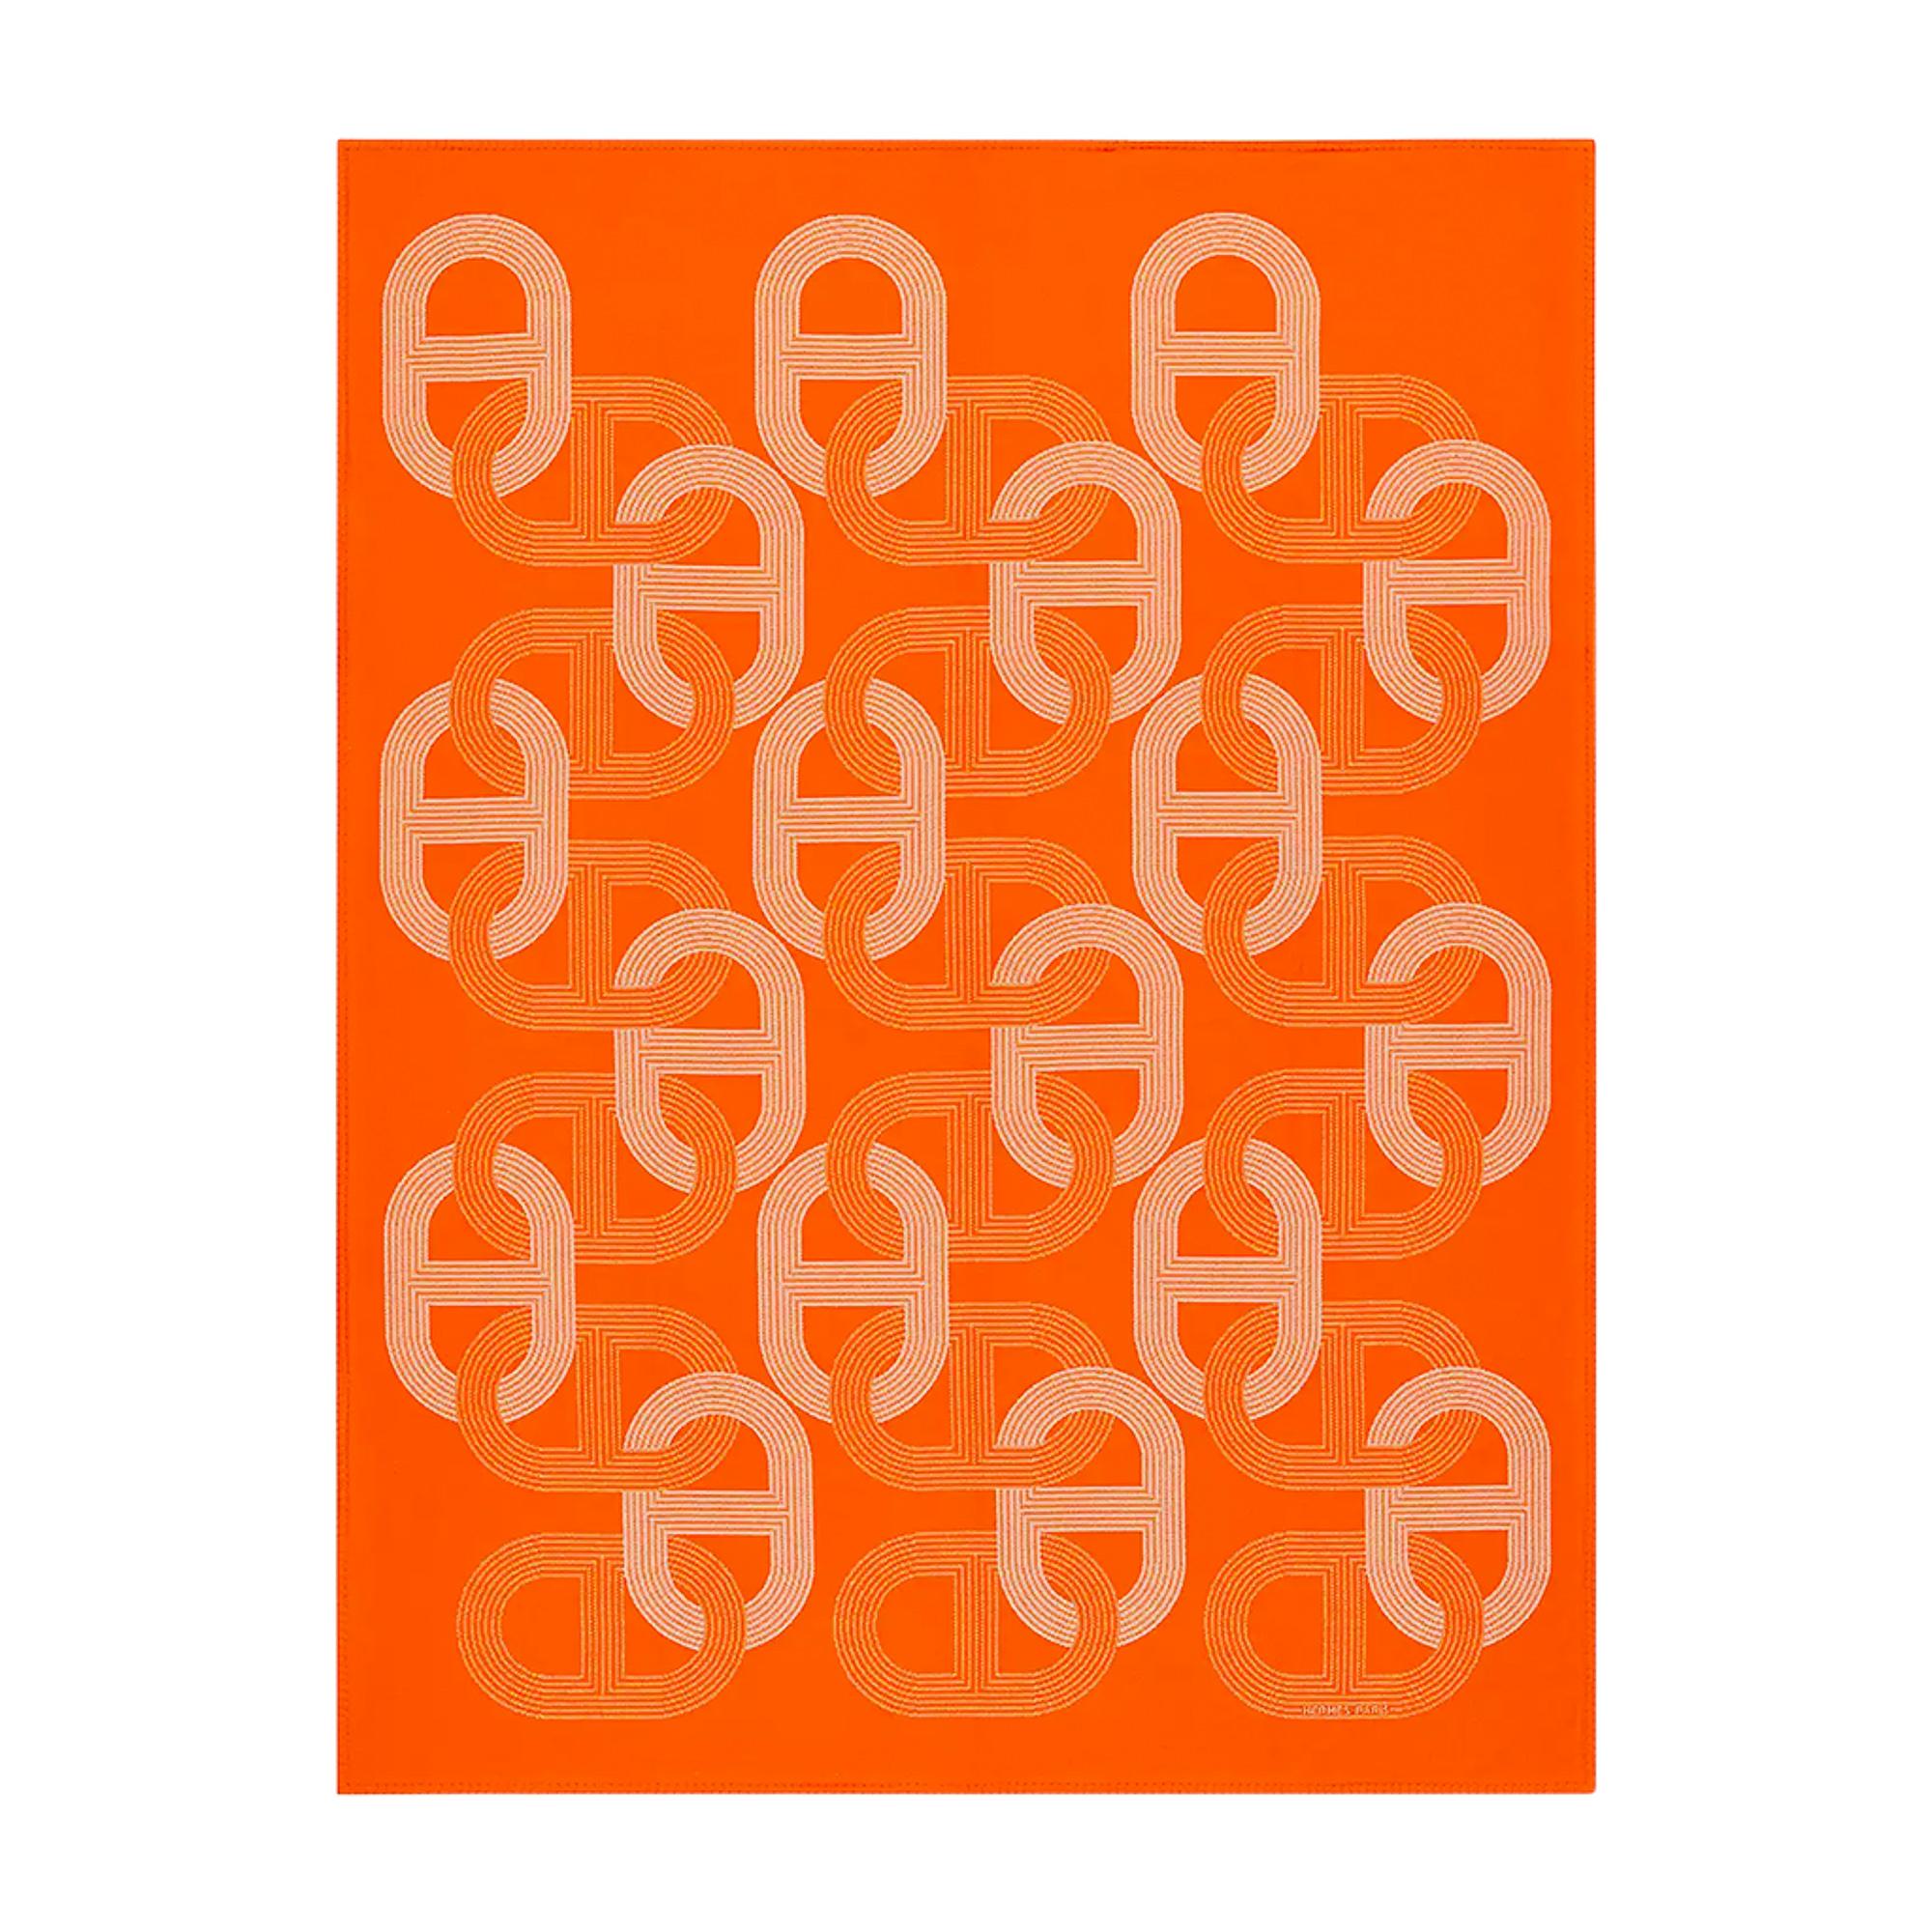 Mightychic offers a limited edition Hermes Circuit 24 Blanket featured in Orange colorway.
Created from 100% Merino Wool this fabulous blanket is a chic addition to any room.
Designed by Benoit-Pierre in 2012 this is a contemporary take on the